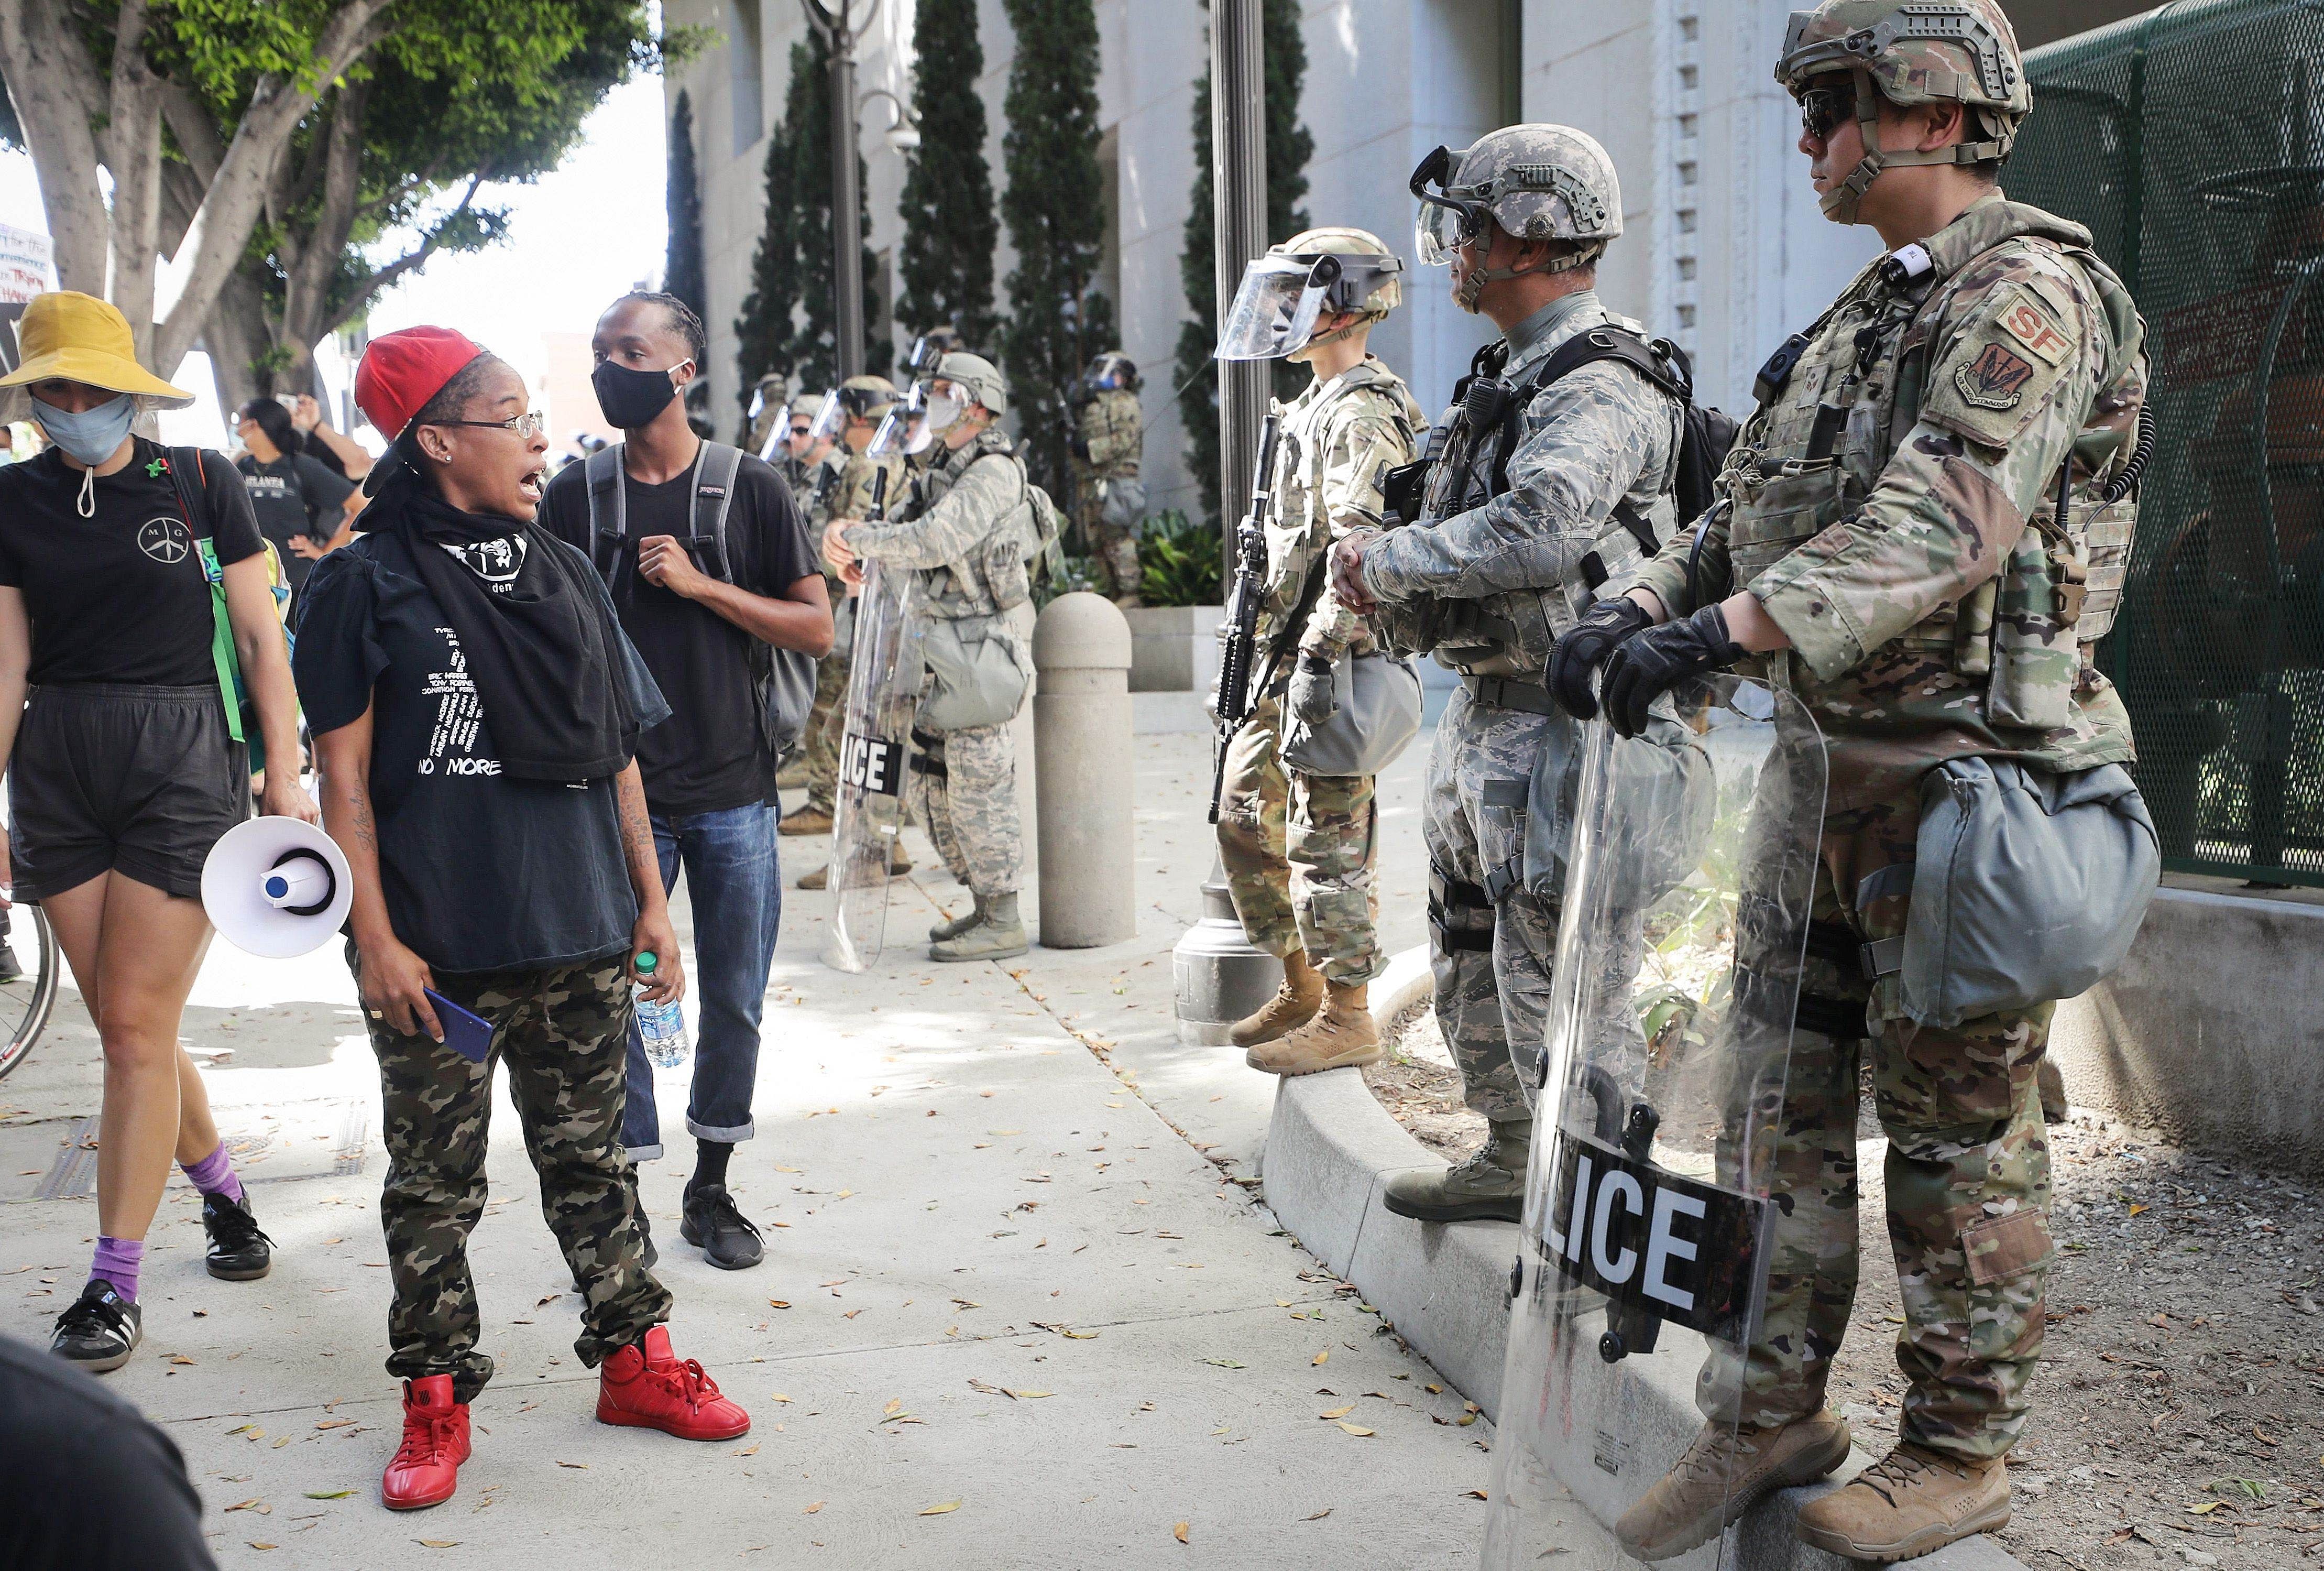 A protestor speaks to National Guard troops posted outside the District Attorney's office during a peaceful demonstration over George Floyd's death. Credit: AFP